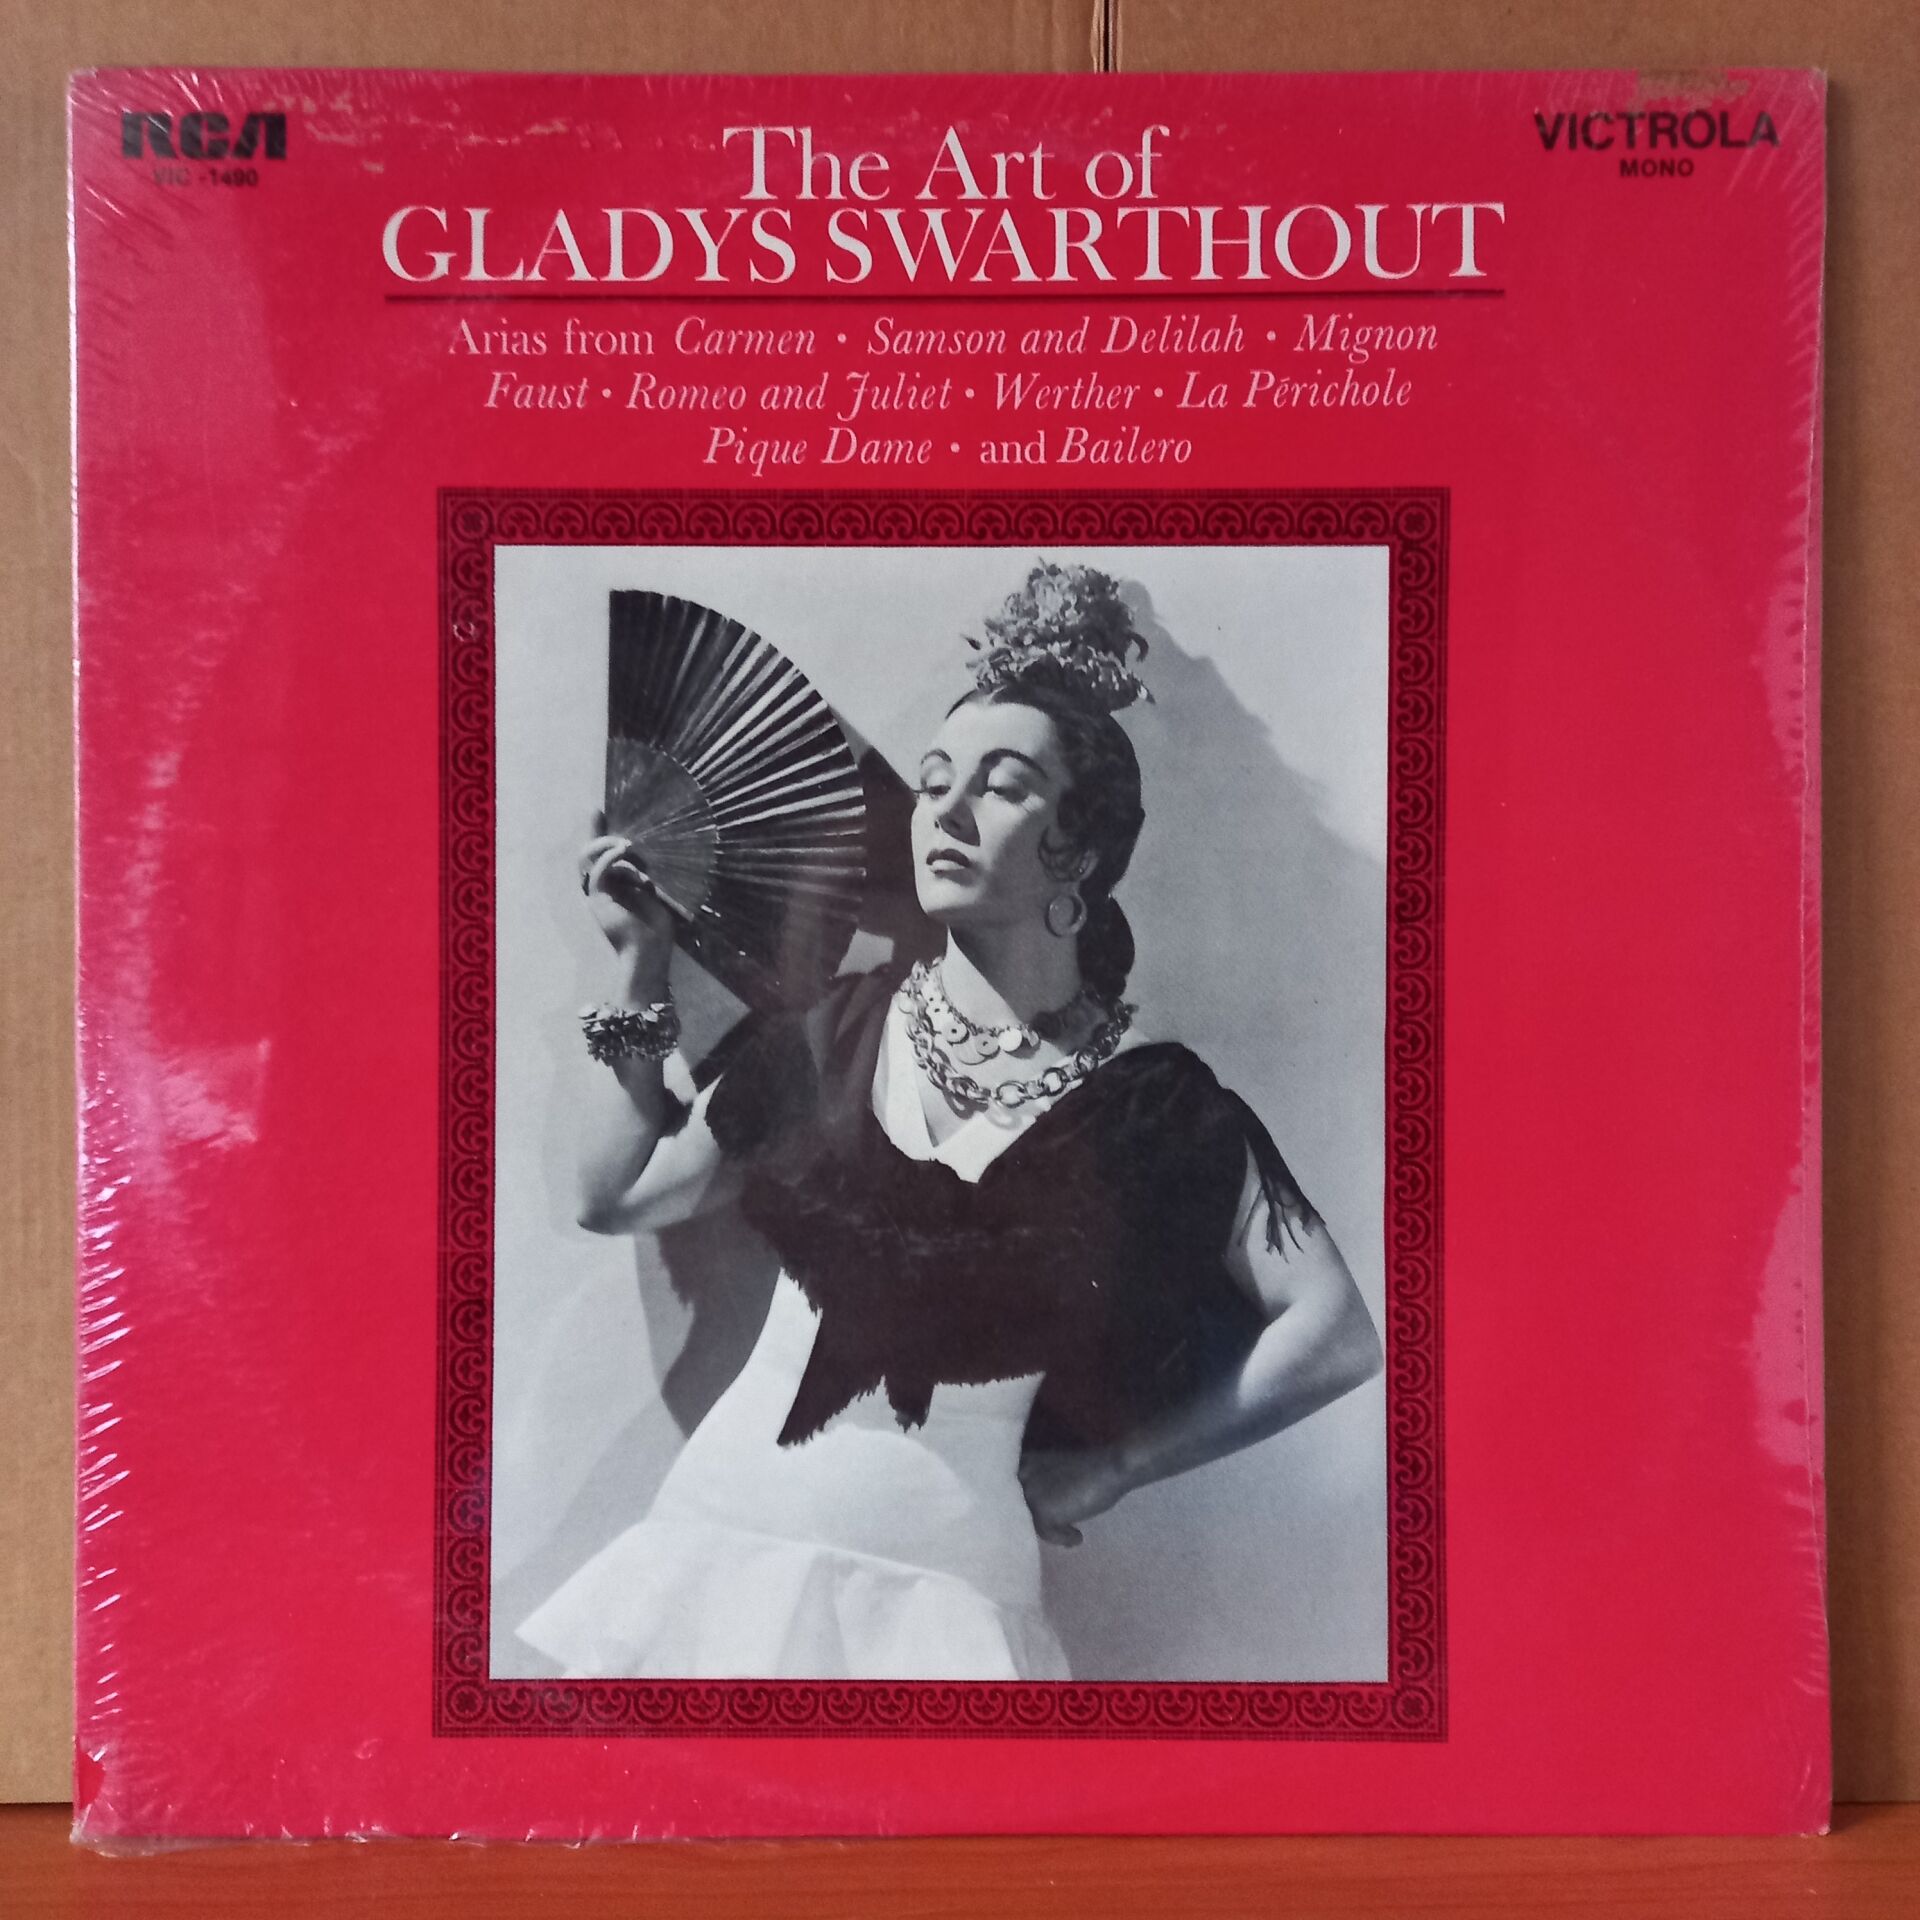 GLADYS SWARTHOUT – THE ART OF GLADYS SWARTHOUT / ARIAS FROM CARMEN, SAMSON AND DELILAH, MIGNON, FAUST, ROMEO AND JULIET, WERTHER, LA PERICHOLE, PIQUE DAME AND BAILERO (1970) - LP DÖNEM BASKISI SIFIR PLAK